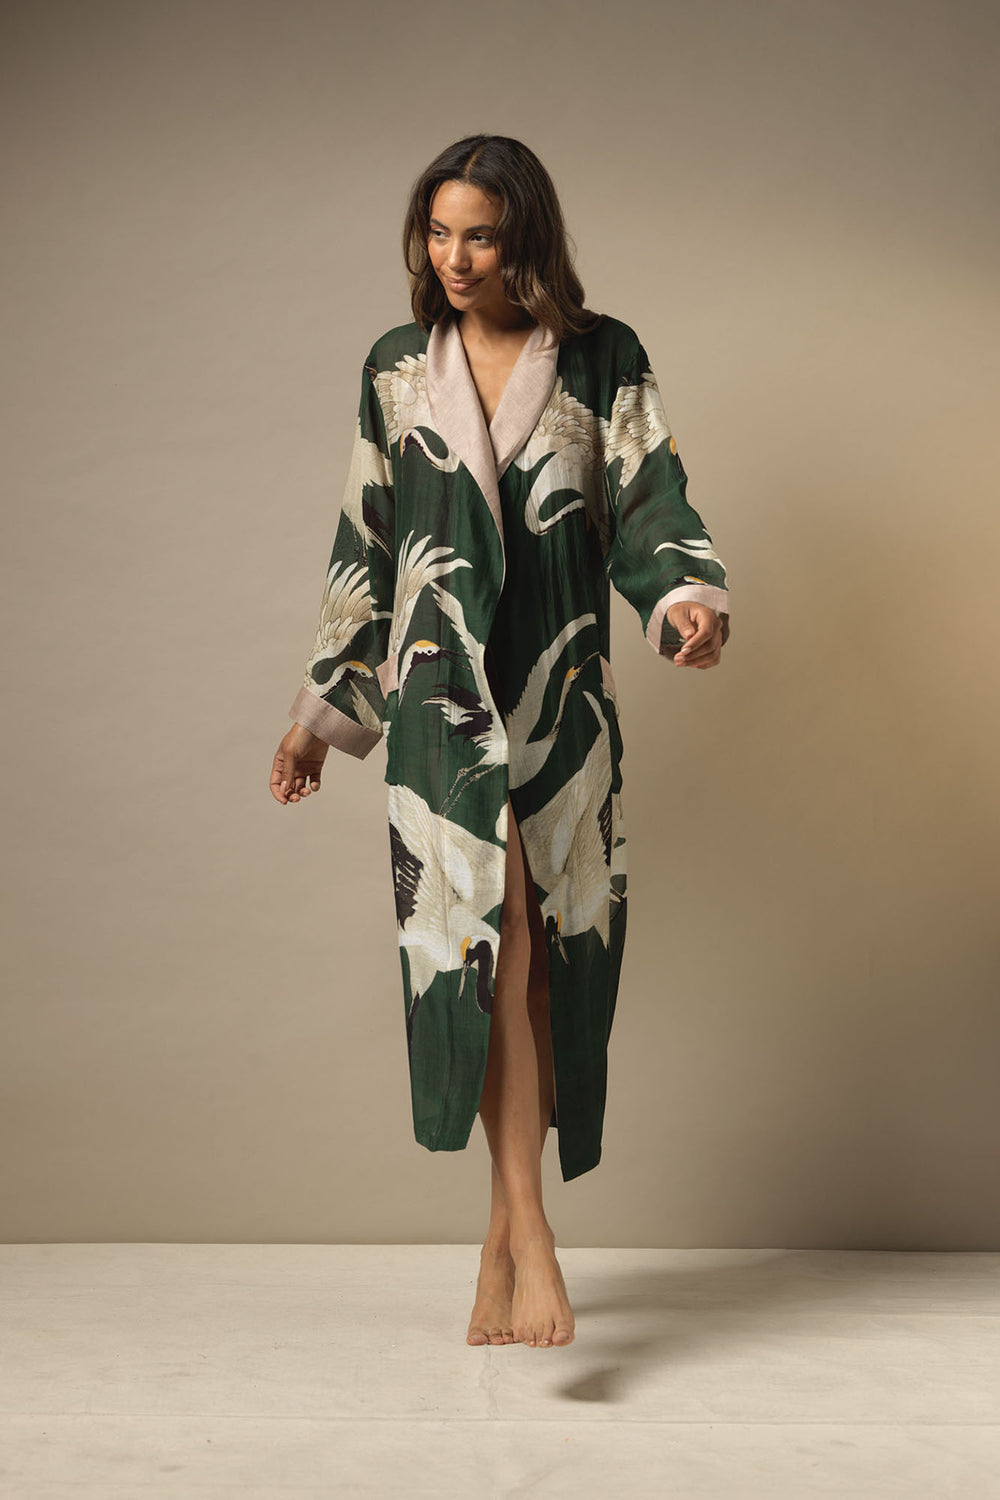 ladies dressing gown green background with stork bird print by One Hundred Stars